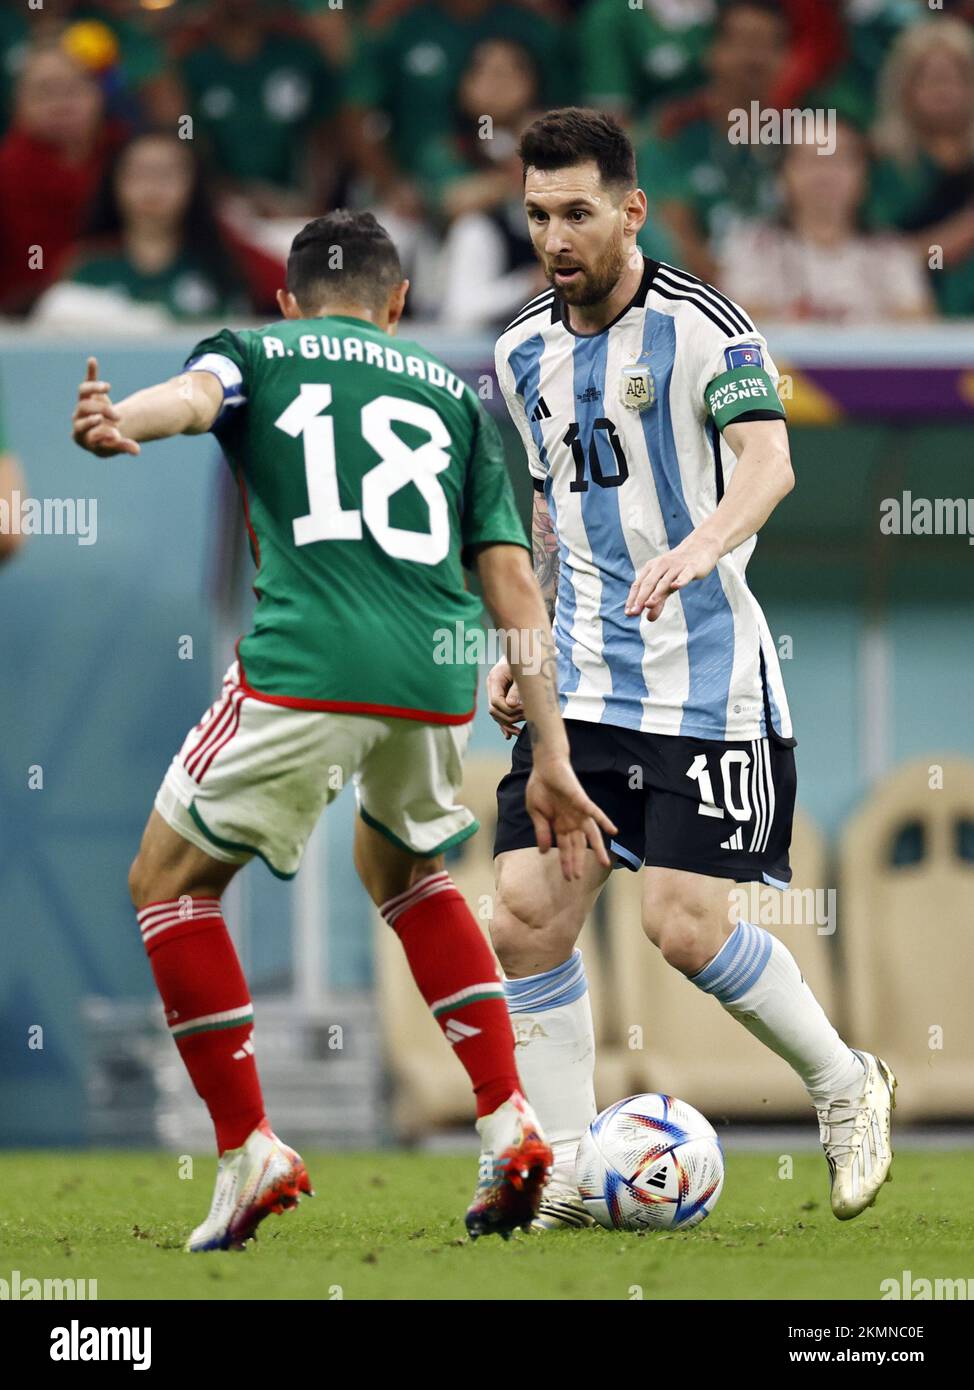 LUSAIL CITY - (l-r) Andres Guardado of Mexico, Lionel Messi of Argentina during the FIFA World Cup Qatar 2022 group C match between Argentina and Mexico at Lusail Stadium on November 26, 2022 in Lusail City, Qatar. AP | Dutch Height | MAURICE OF STONE Stock Photo